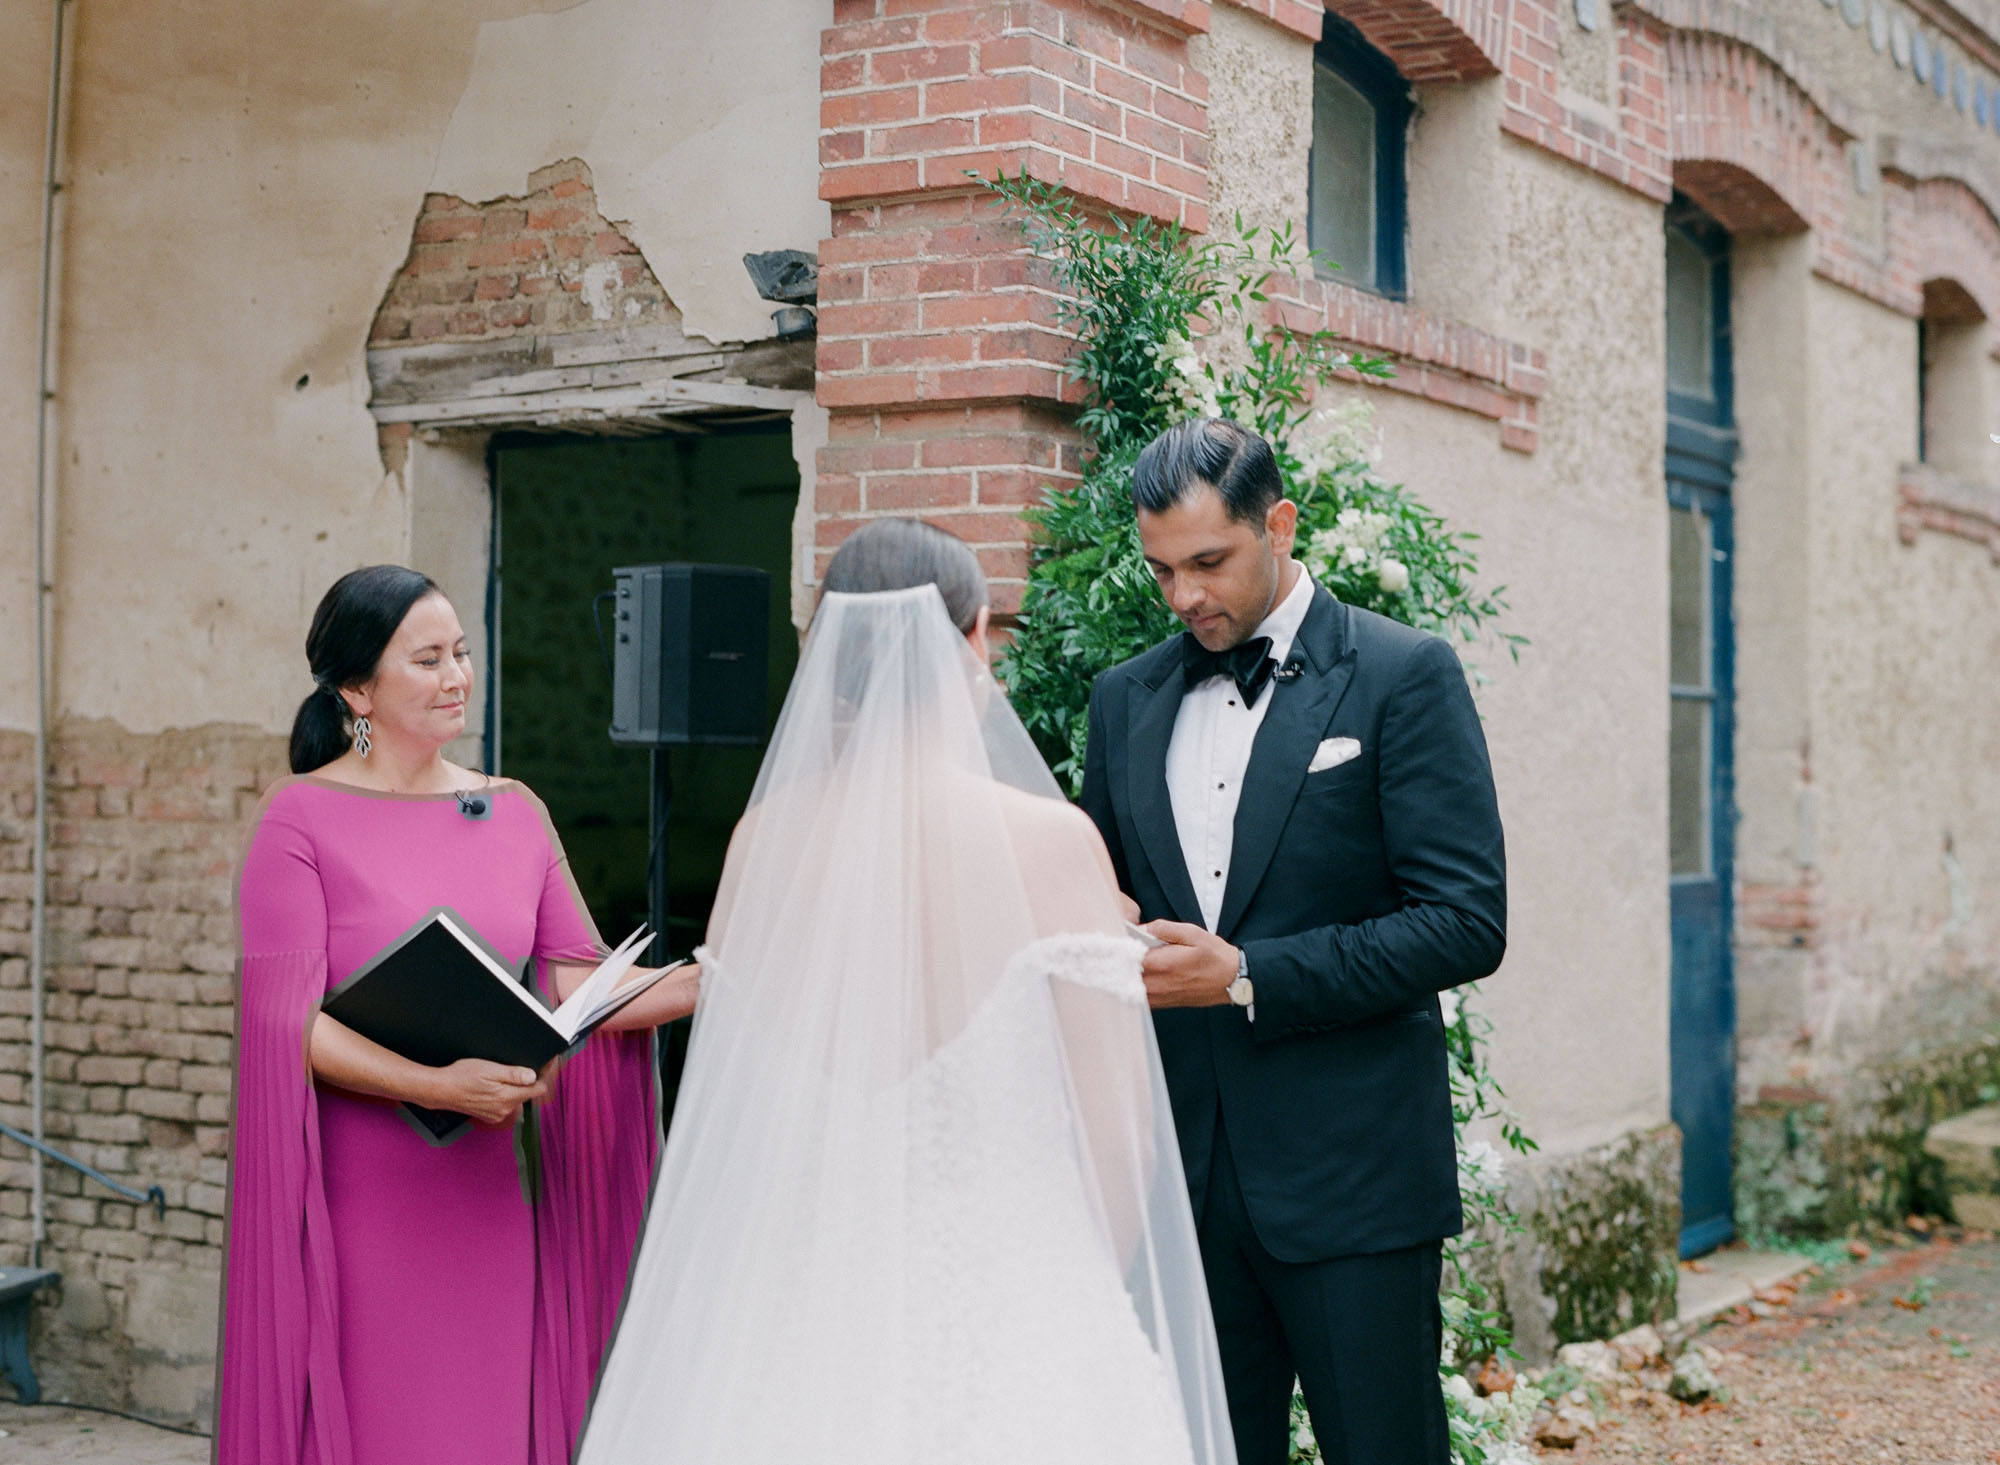 Chateau Bouthonvilliers Wedding Photographer | Loire Valley Wedding | France Film Photographer | Molly Carr Photography